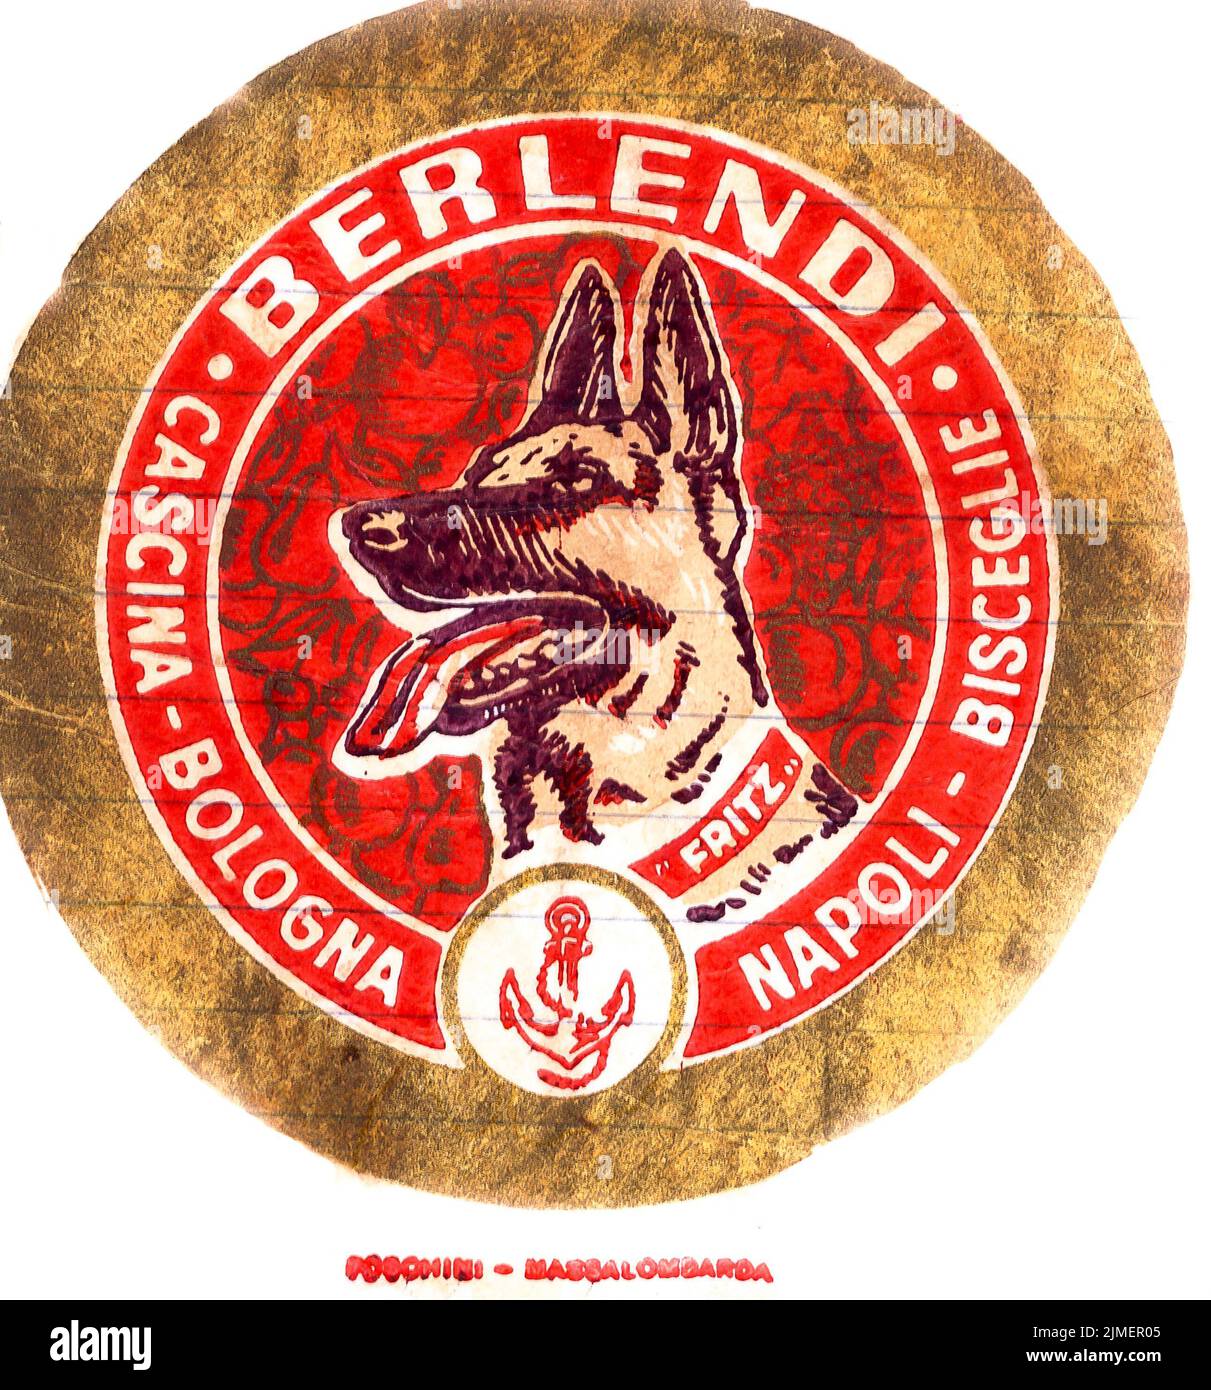 Fresh fruit tissue paper wrapper, from mid-1950s England, with grower's trade mark. Berlendi, Bologna, Napoli. German shepherd dog's head. Red,gold. Stock Photo